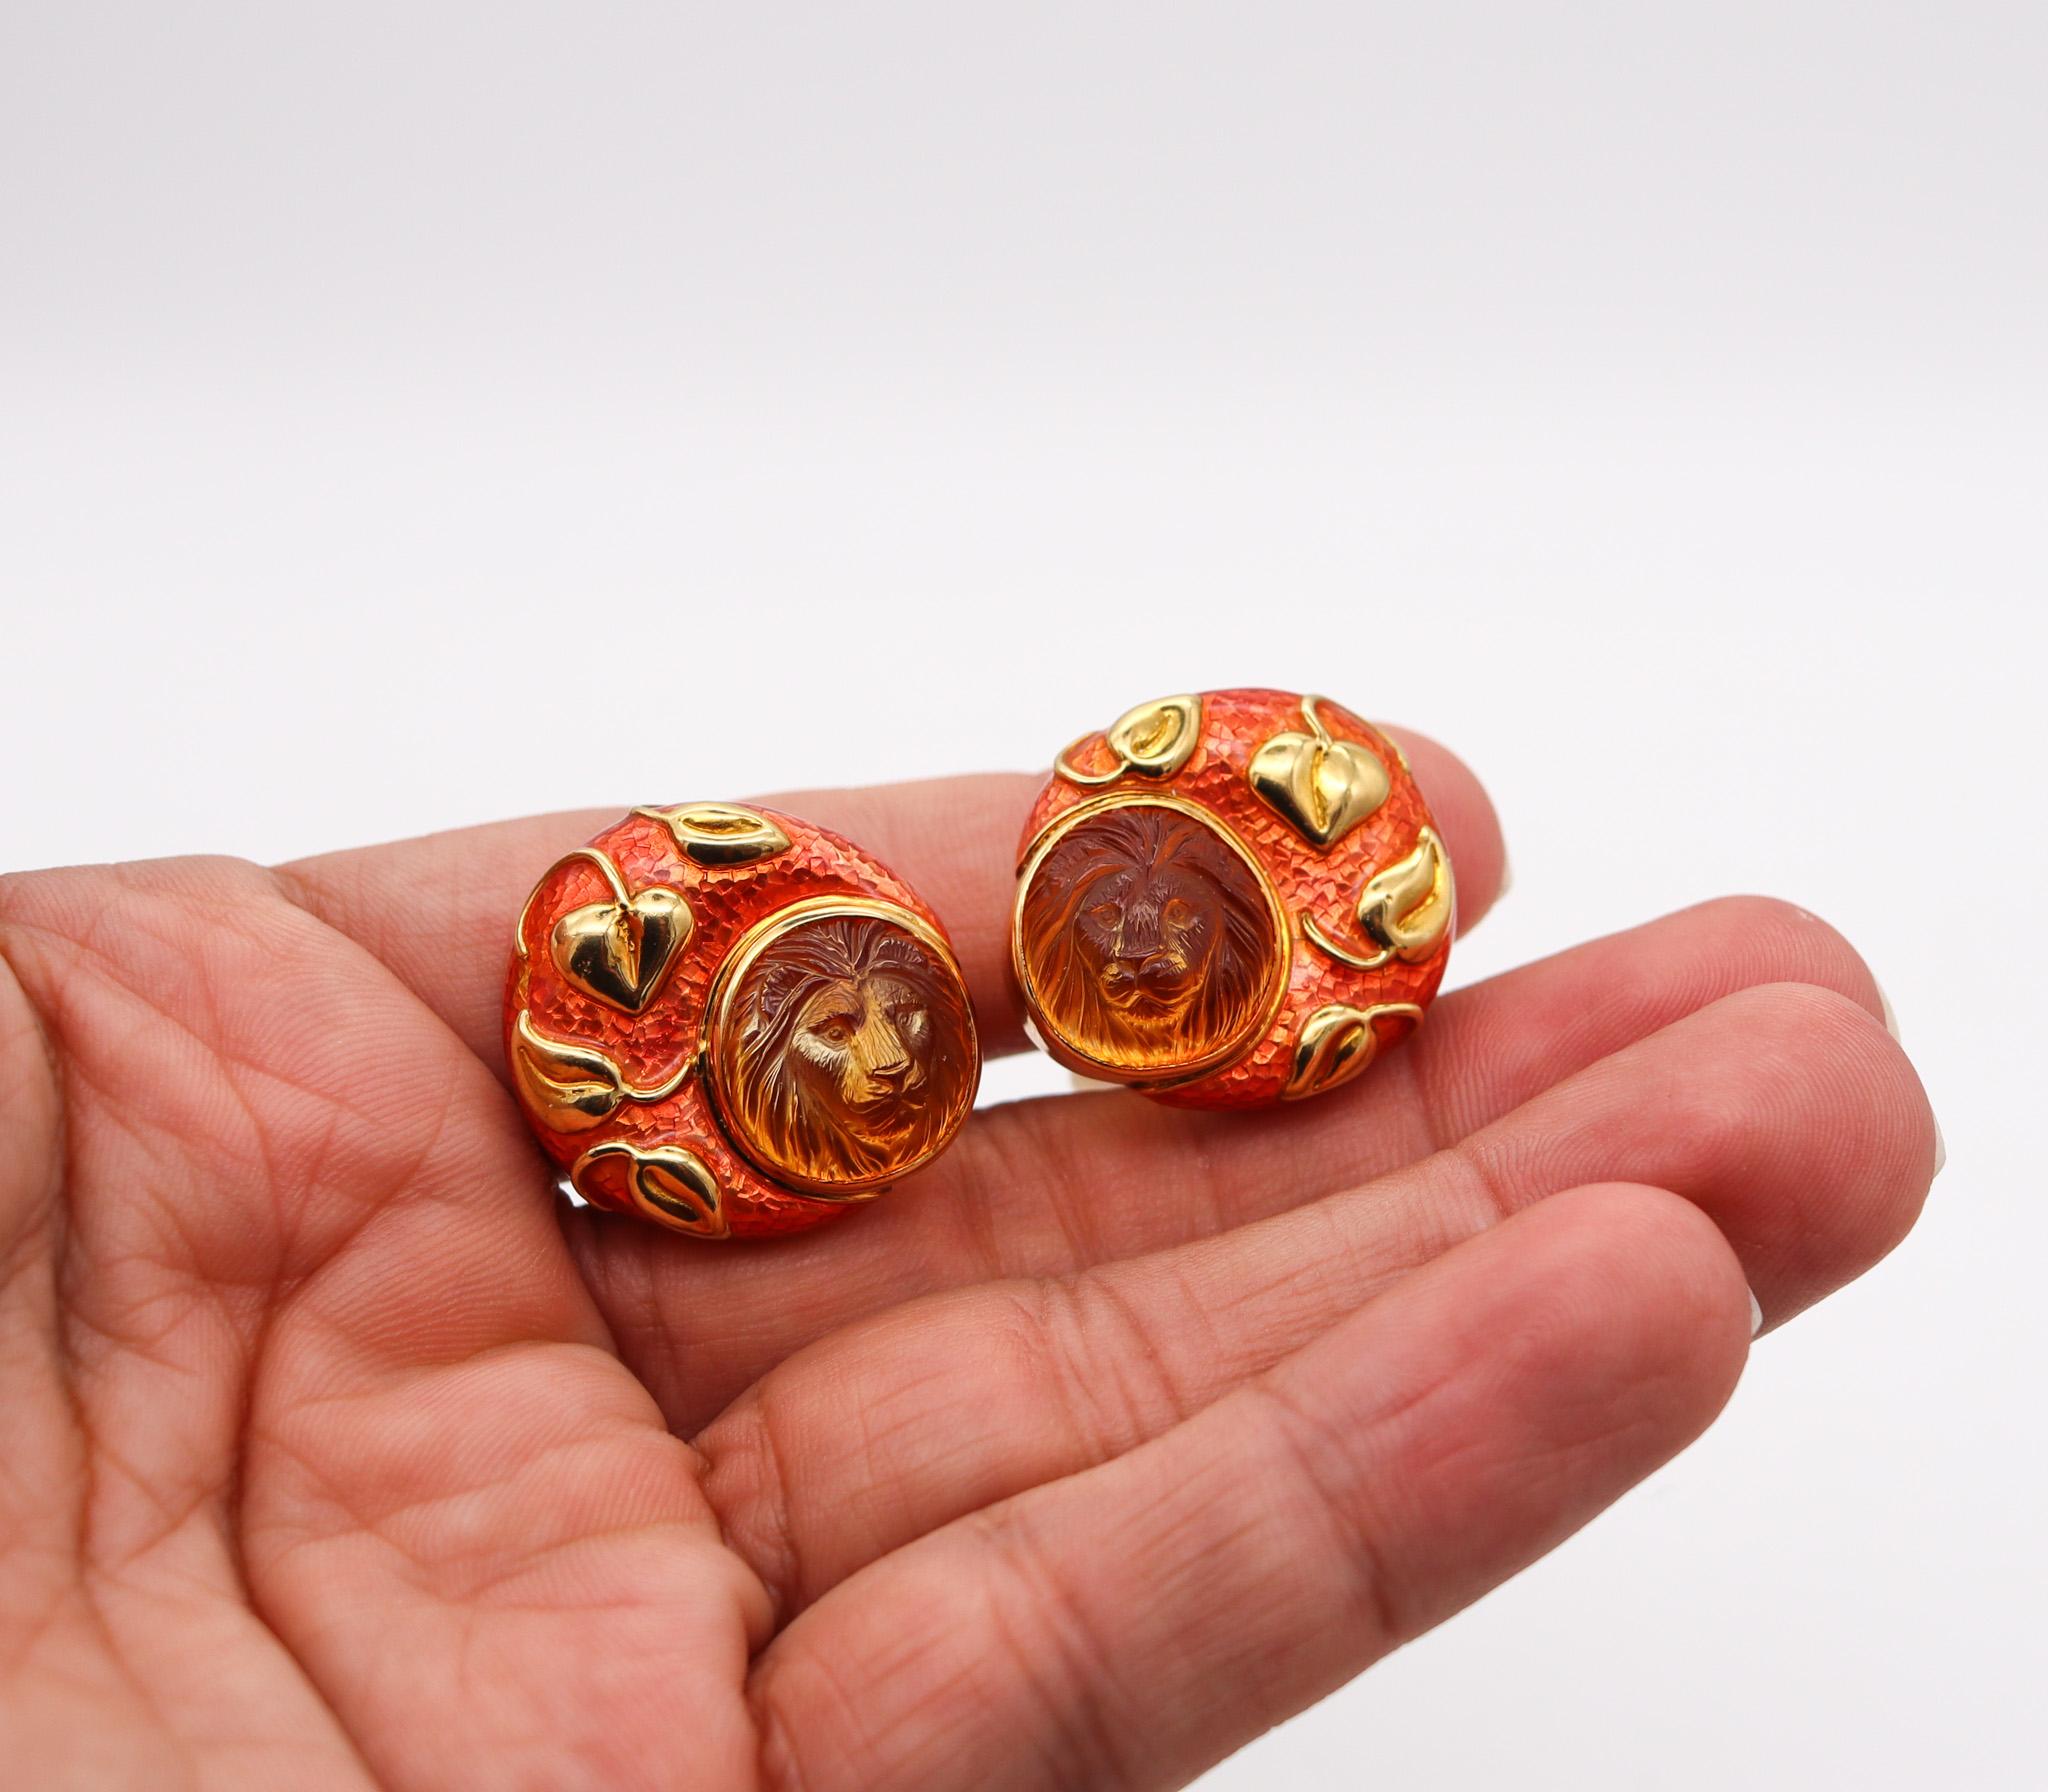 Elizabeth Gage 1993 London Enameled Lions Clips Earrings 18Kt Gold With Citrines In Excellent Condition For Sale In Miami, FL